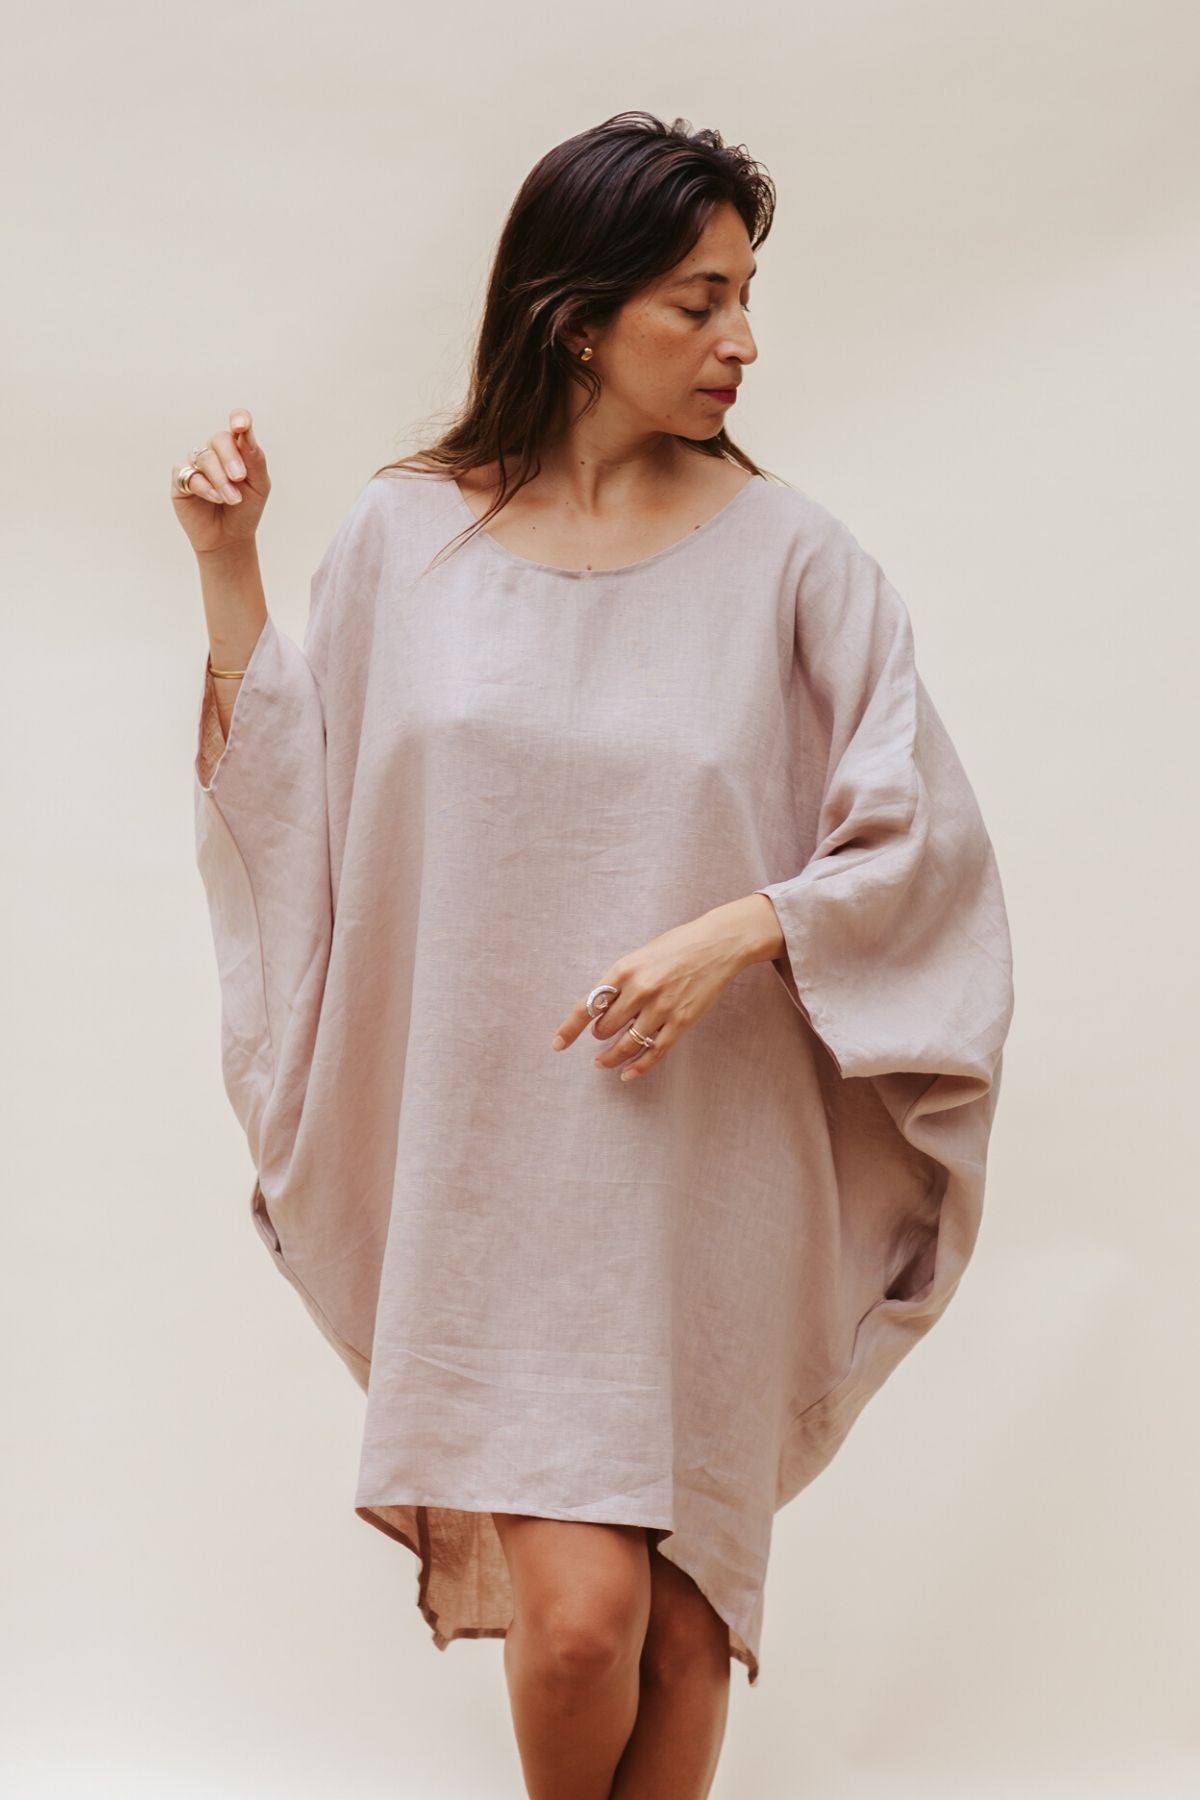 Royal Lavender Butterfly Tunic (100% Linen, Limited Spring Edition)